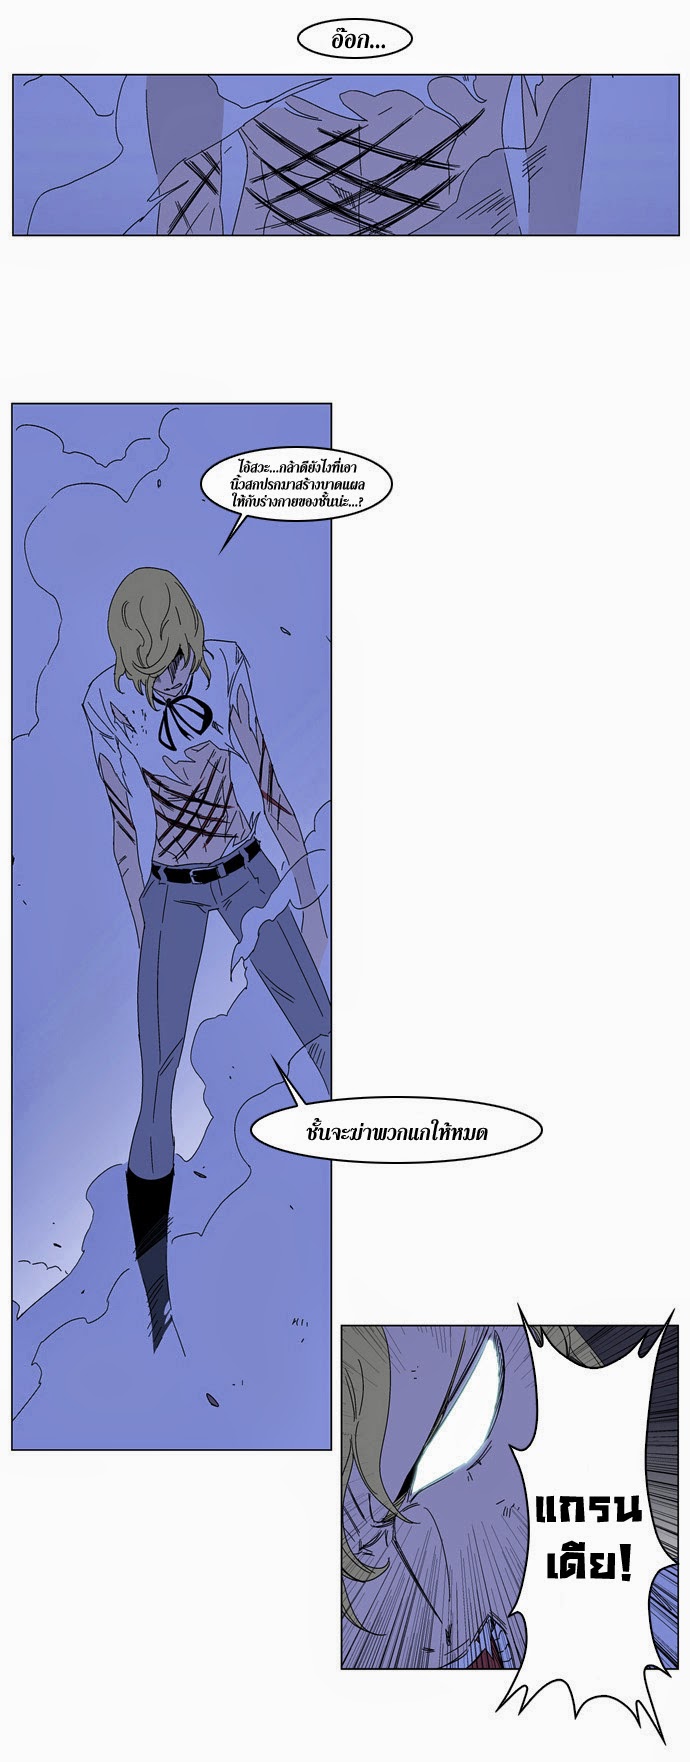 Noblesse 185 023